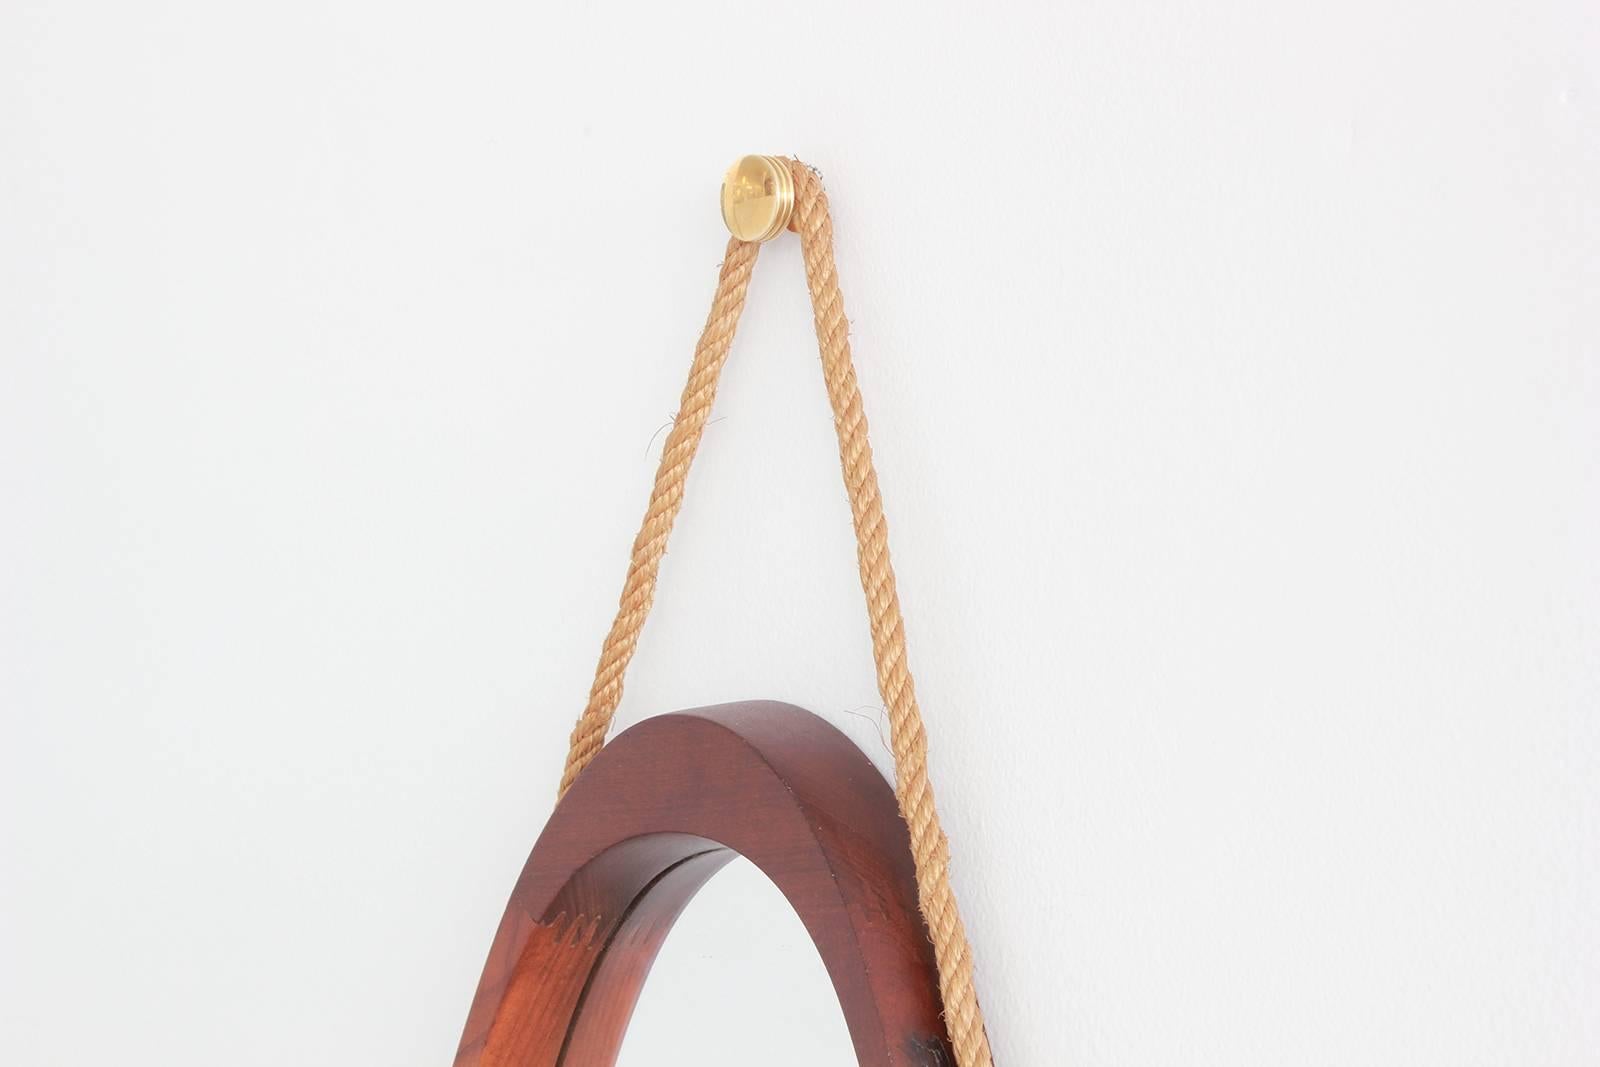 Unique shaped Italian mirror made of teak with simple hardware and design. Beautiful details like green leather tassels at joints.

Perfect for hallway or foyer.

Measure: Overall height (including rope): 39.5